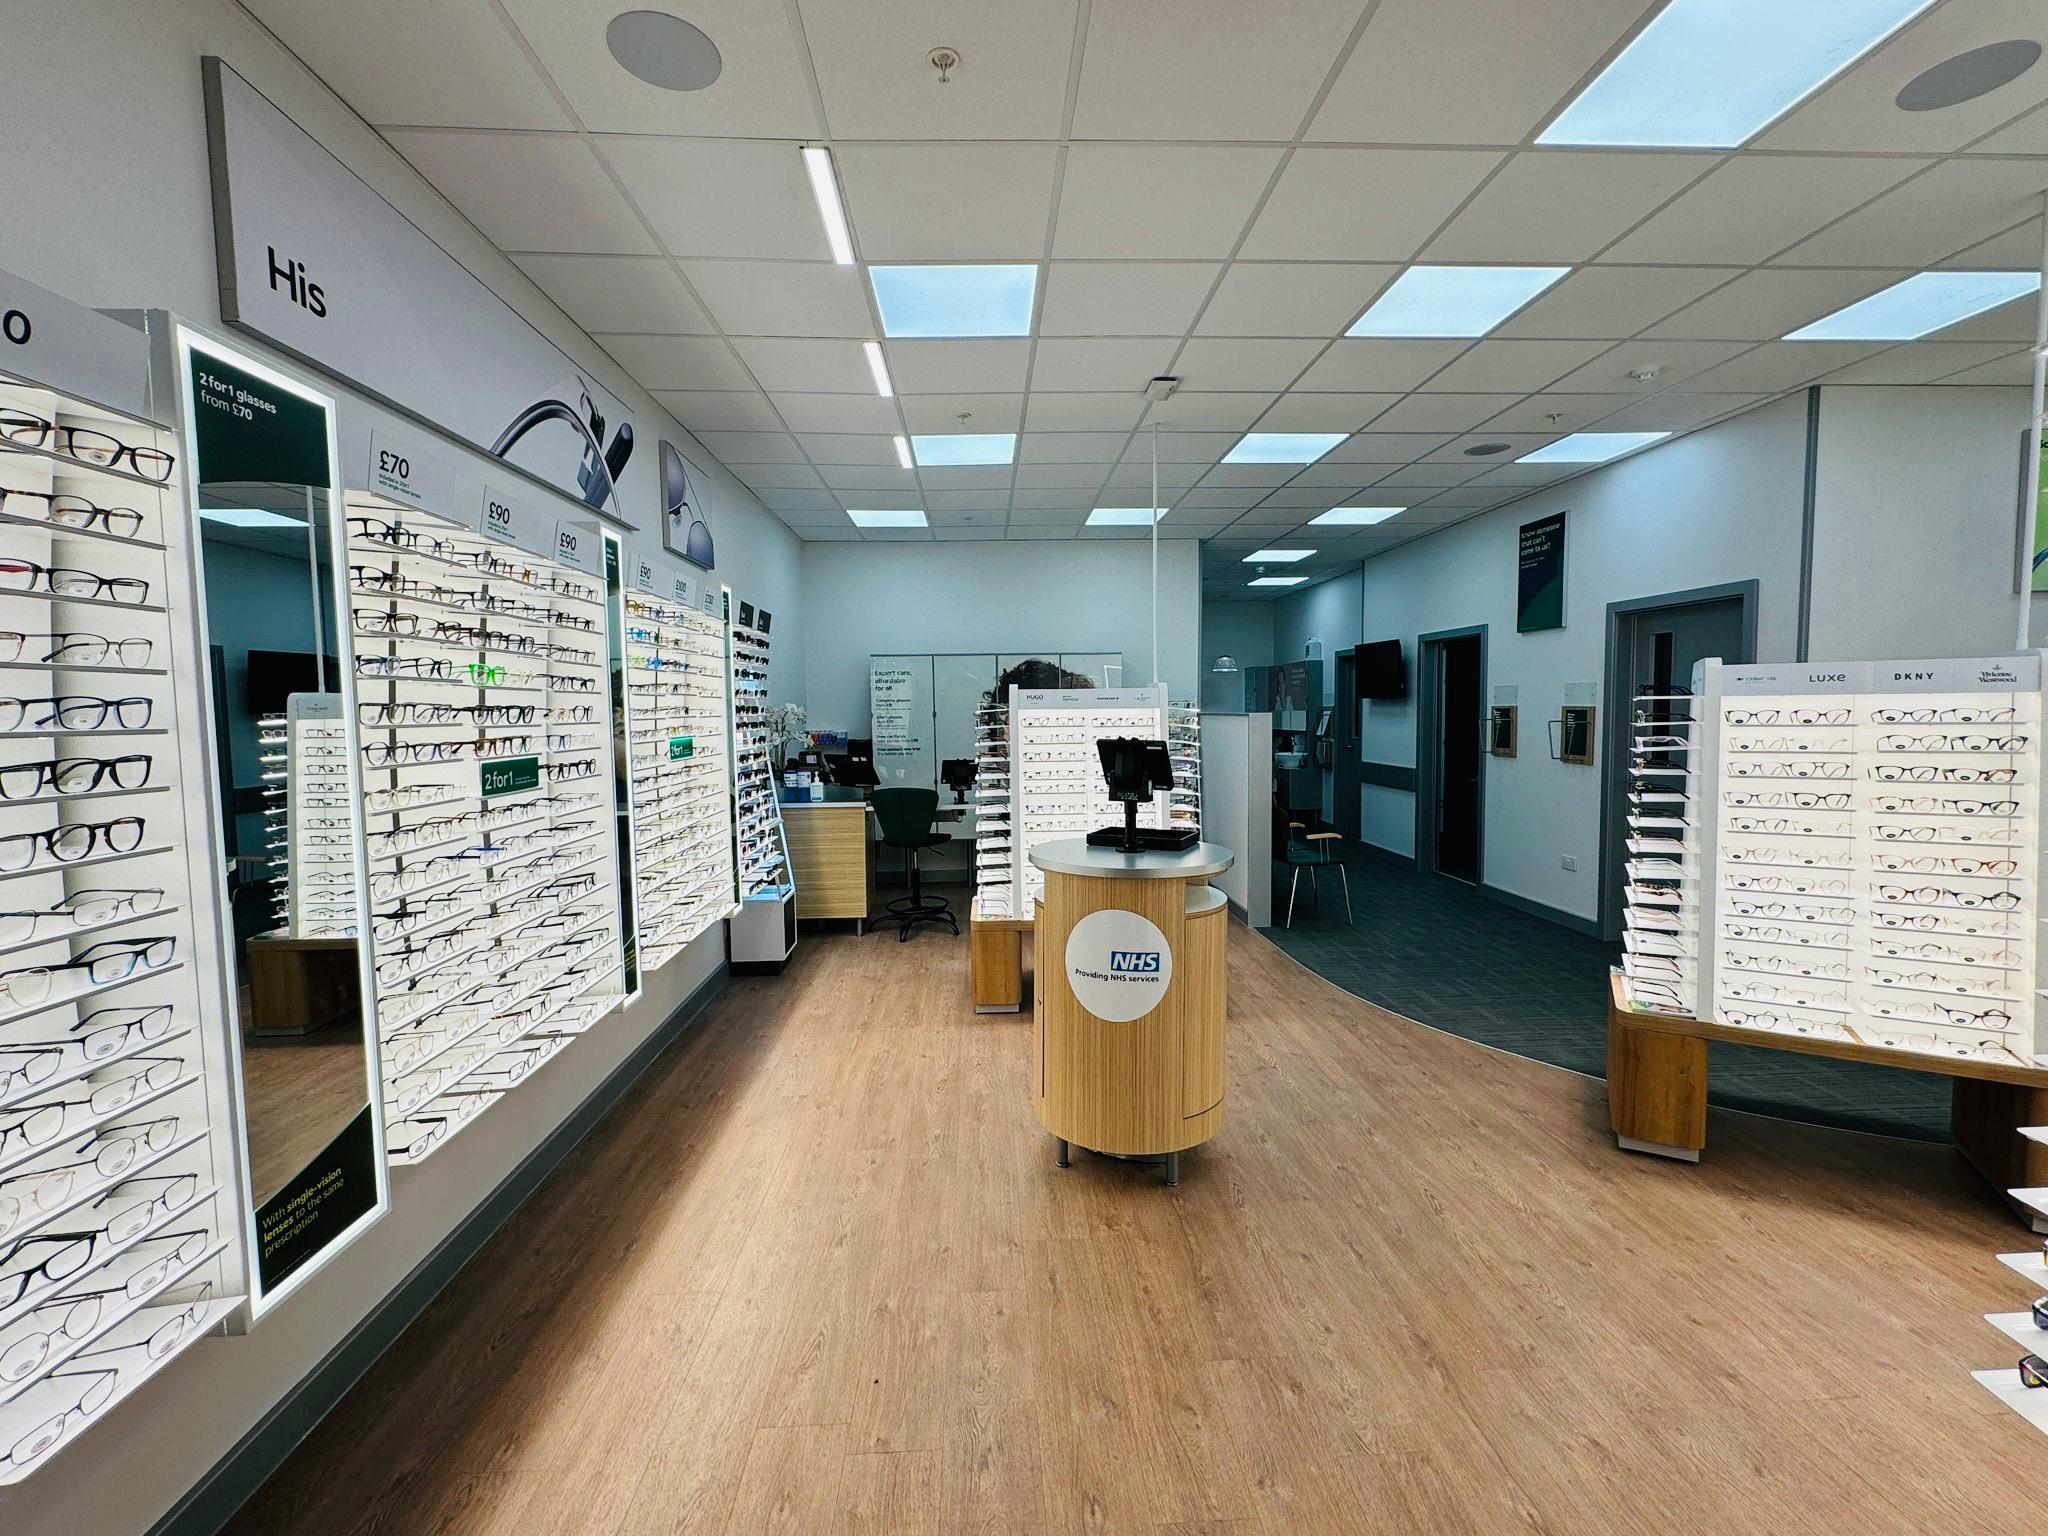 Specsavers Opticians and Audiologists - London Colney Specsavers Opticians and Audiologists - London Colney London Colney 01727 227455